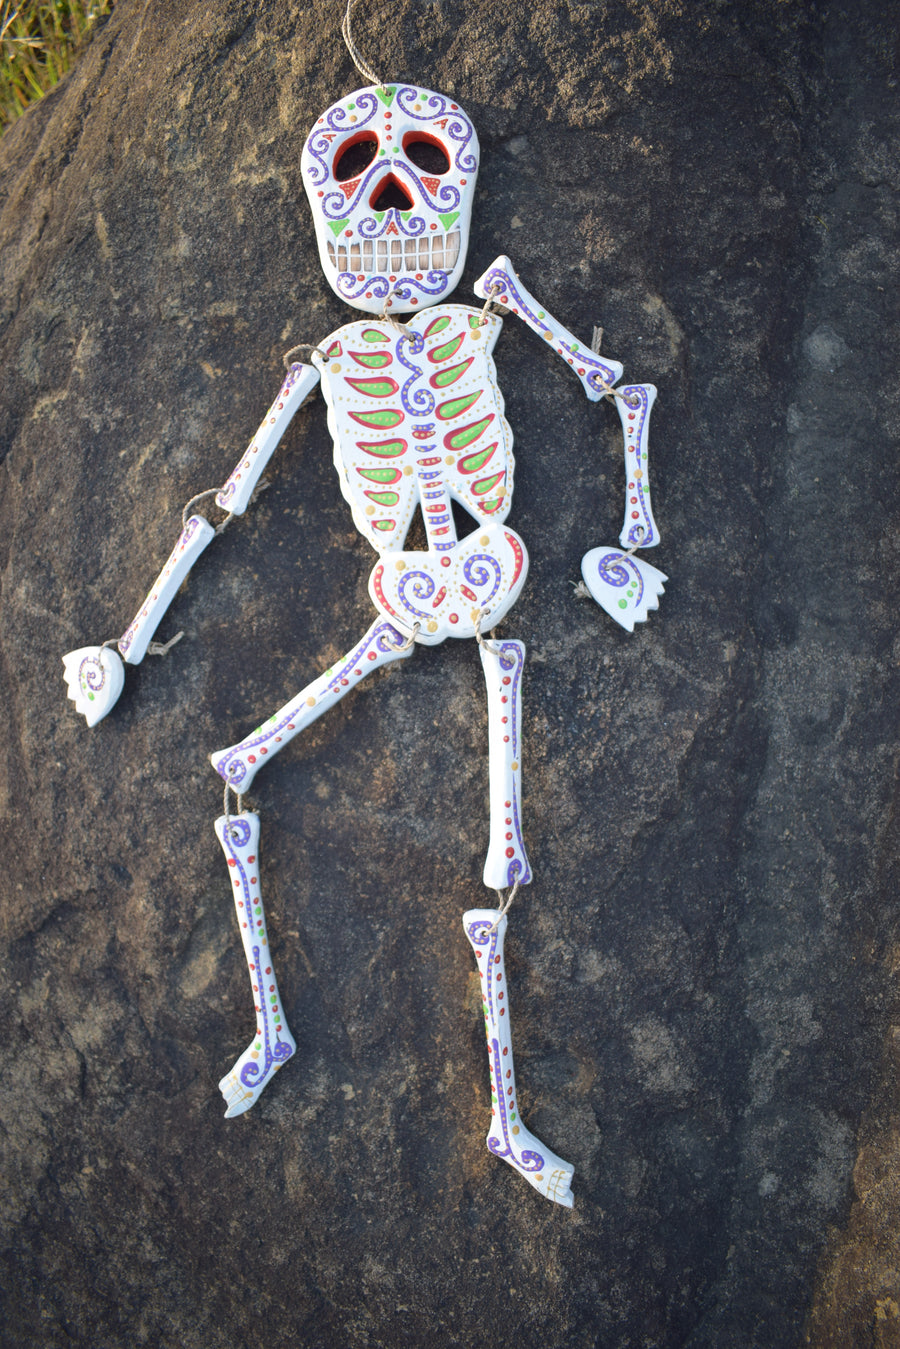 A colourful calaca Day of the Dead spirit medicine rattle resting on a rock